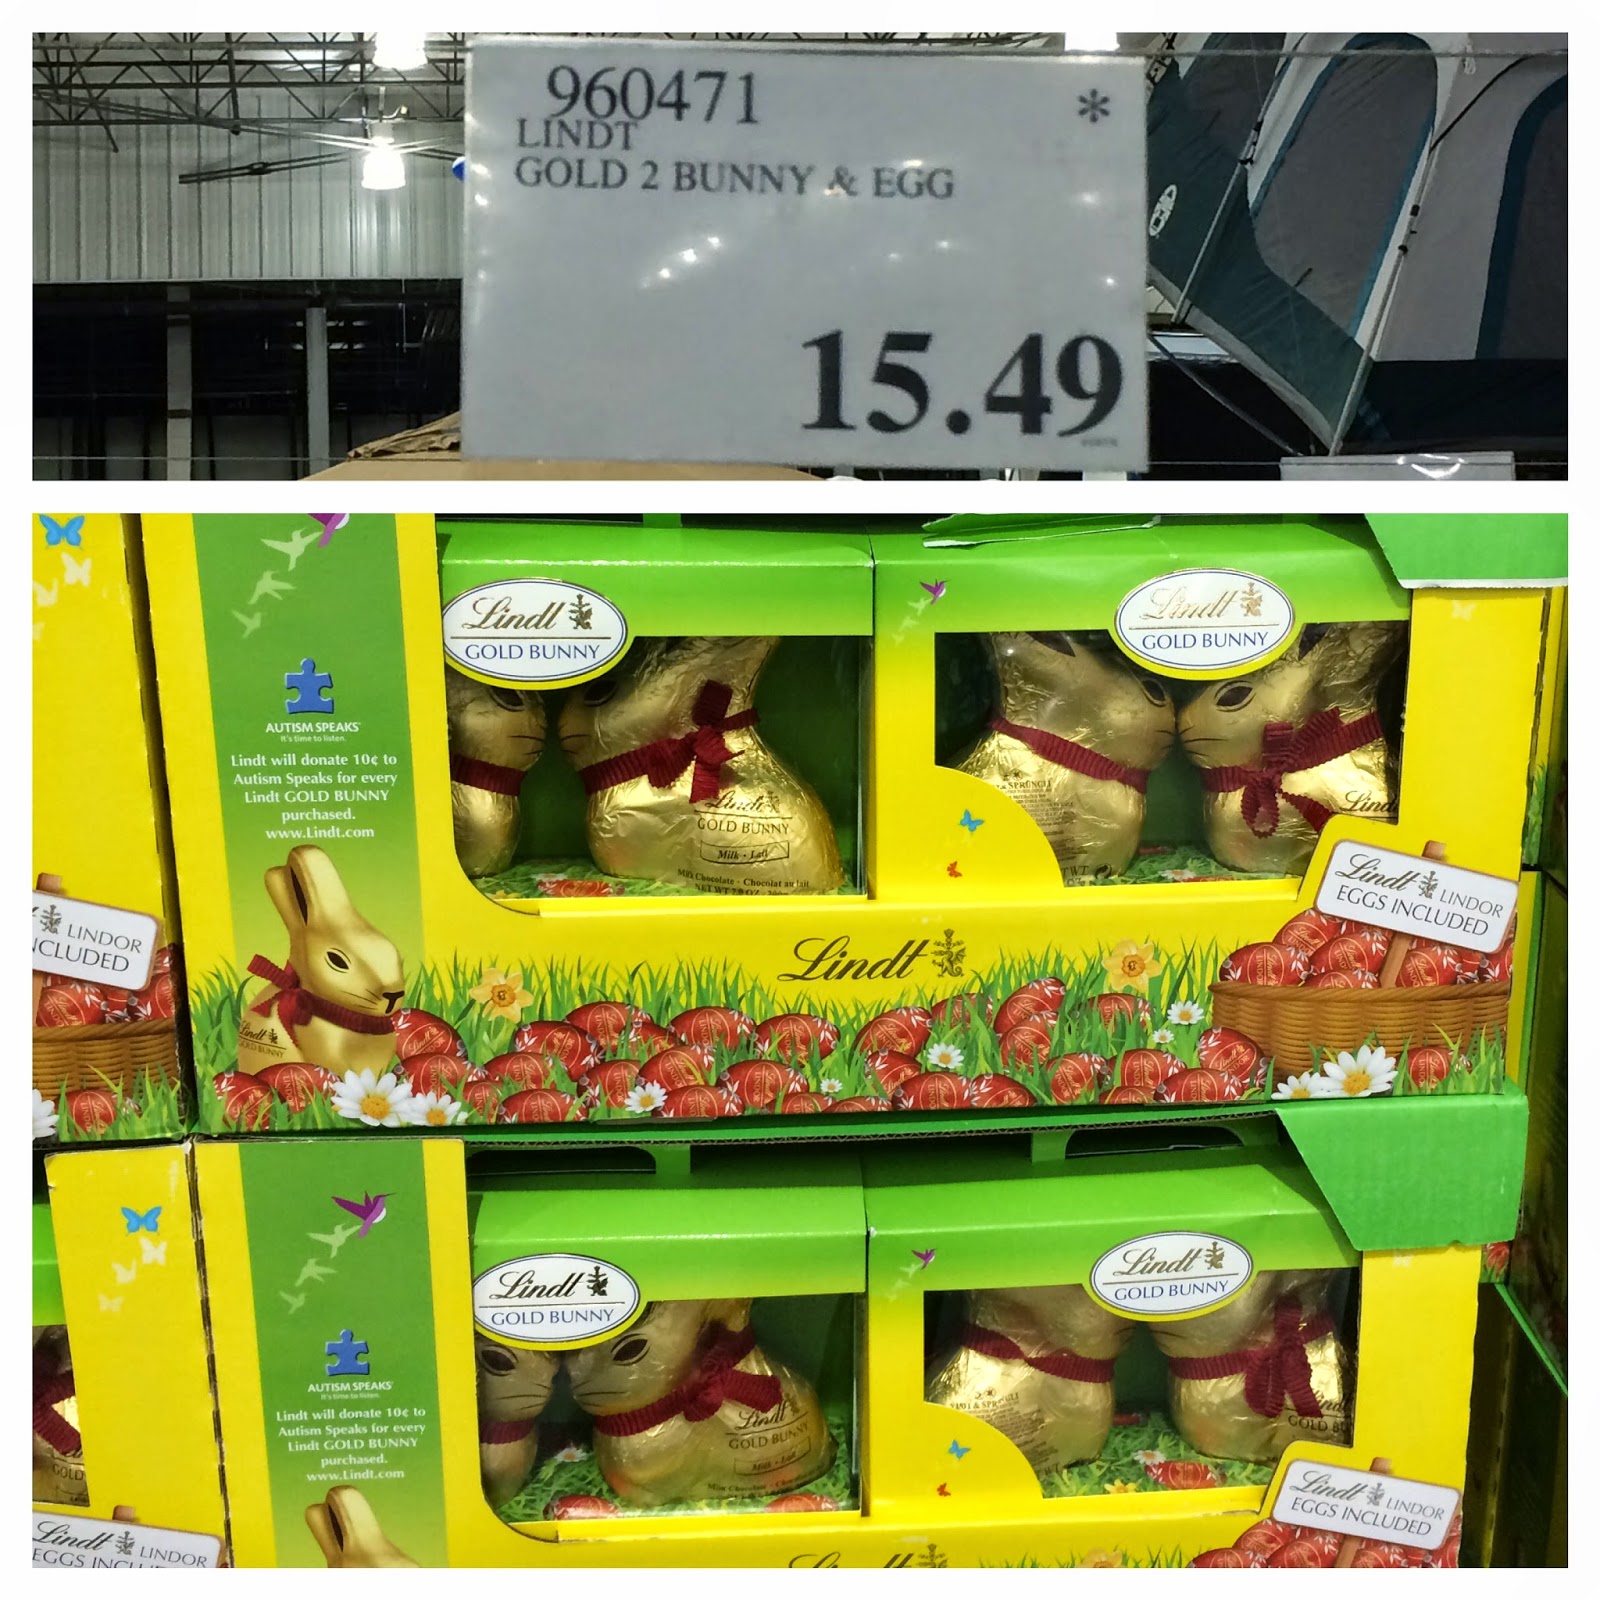 the Costco Connoisseur Celebrate Easter with Costco!